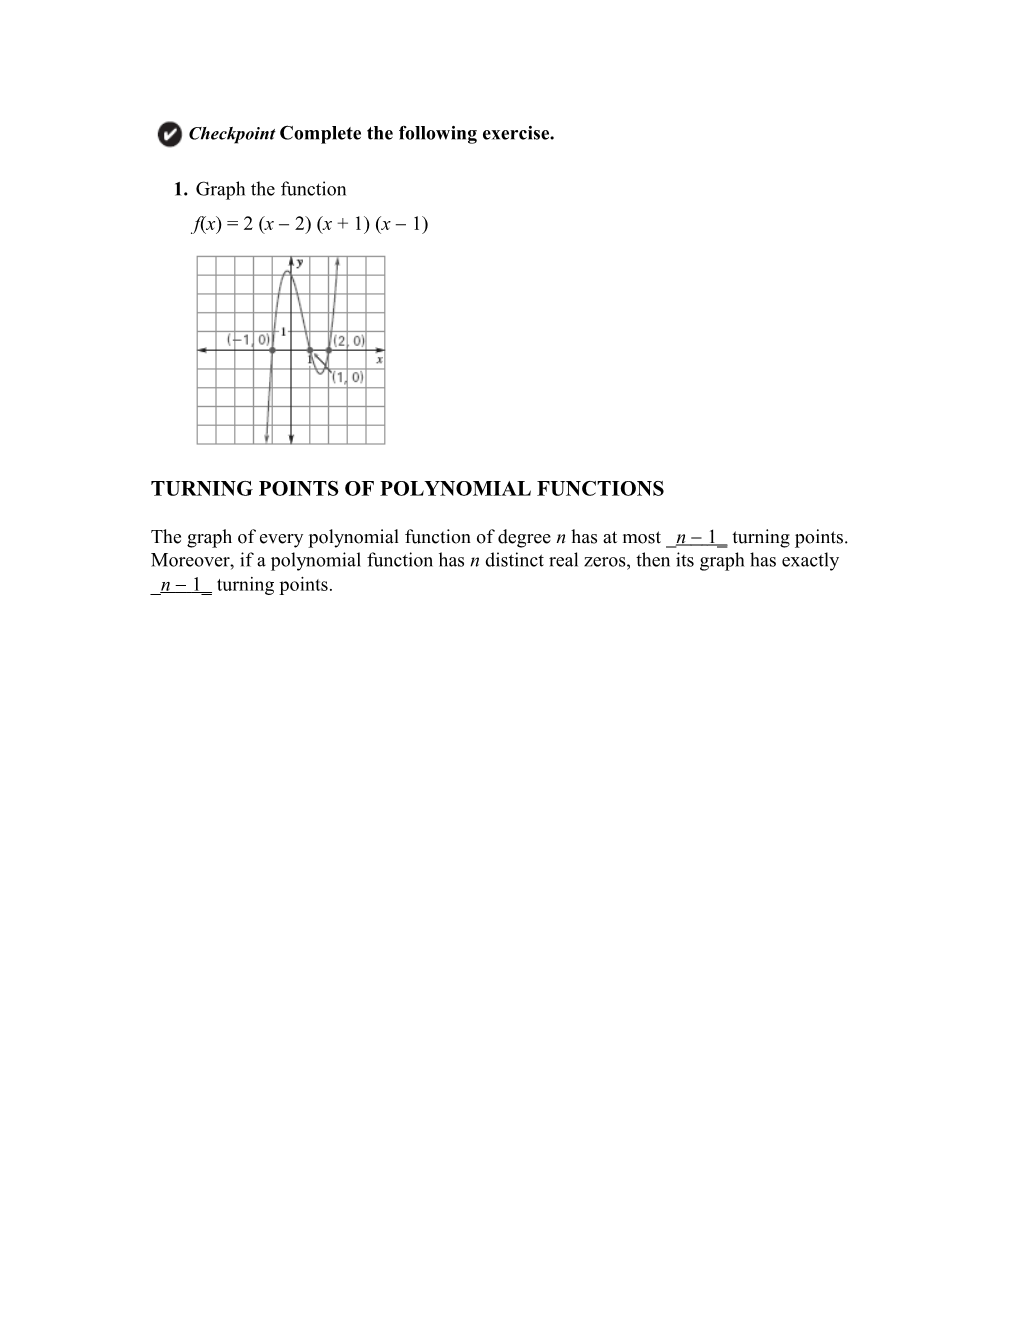 Analyze Graphs of Polynomial Functions